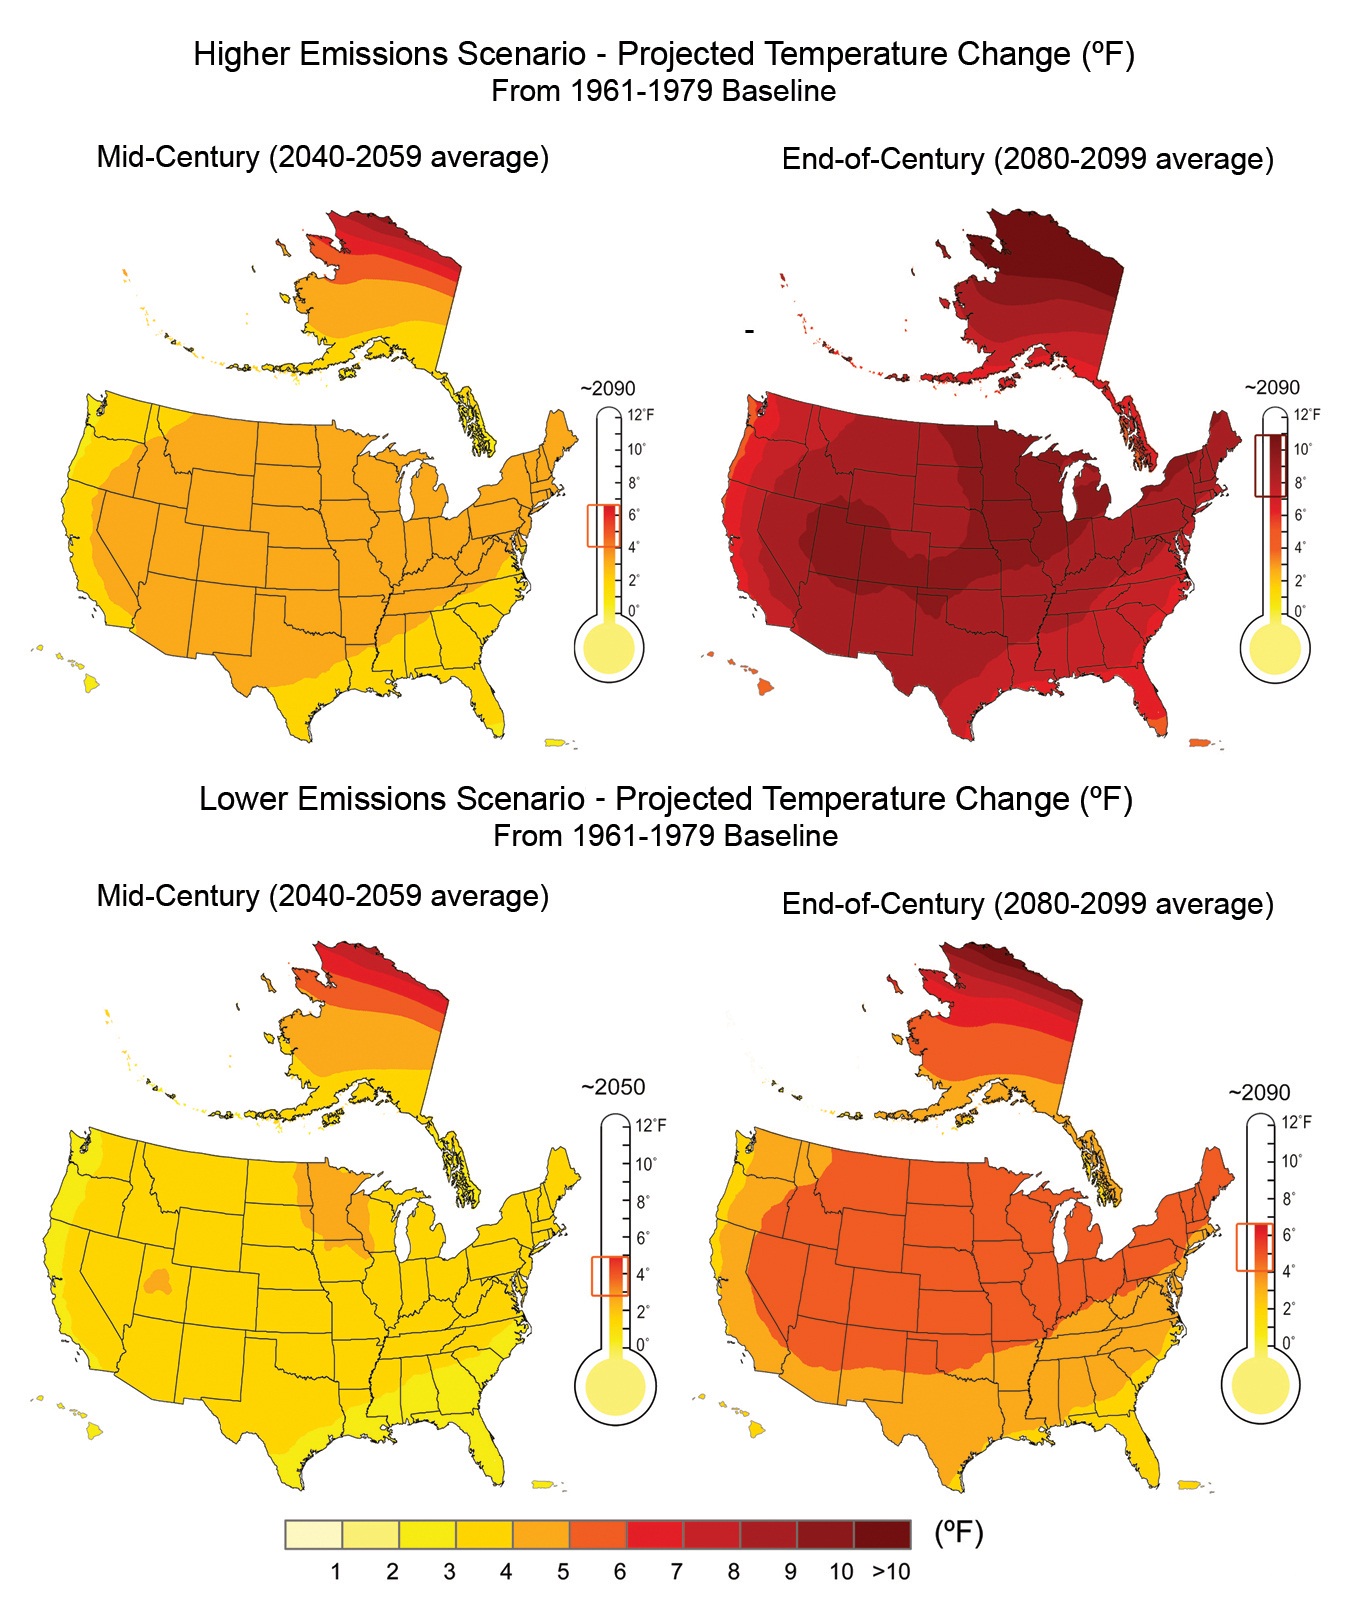 …/Science/ScenarioUSTemp.jpg USGCRP http://globalchange.gov/HighResImages/2-National-pg-29.jpg Image shows a set of four maps of the United States that show projected temperature change. The top two maps show the projections under a higher emissions scenario and the bottom two maps show the projections under a lower emissions scenario. On the left, the two maps show mid-century projections with average increases for 2040 through 2059. The two mid-century maps are somewhat similar with temperature increases ranging from approximately three degrees in the continental U.S. and the tropical islands to five or six degrees Fahrenheit in northern Alaska. The contrast between the two emissions scenarios is much more drastic for the end-of-century projections, which show average projected temperature change for 2080 to 2099. Under the higher emissions scenario, the entire country is projected to experience an increase of approximately seven to ten degrees Fahrenheit increase. Conversely, under the lower emissions scenario, by the end of the century, the projected temperature increase is closer to four to six degrees Fahrenheit for the majority of the country. Alaska is projected to have a more significant increase in temperature, but the increase is less under the lower emissions scenario. Overall, the divergence between the lower and higher emissions scenarios increases over time.